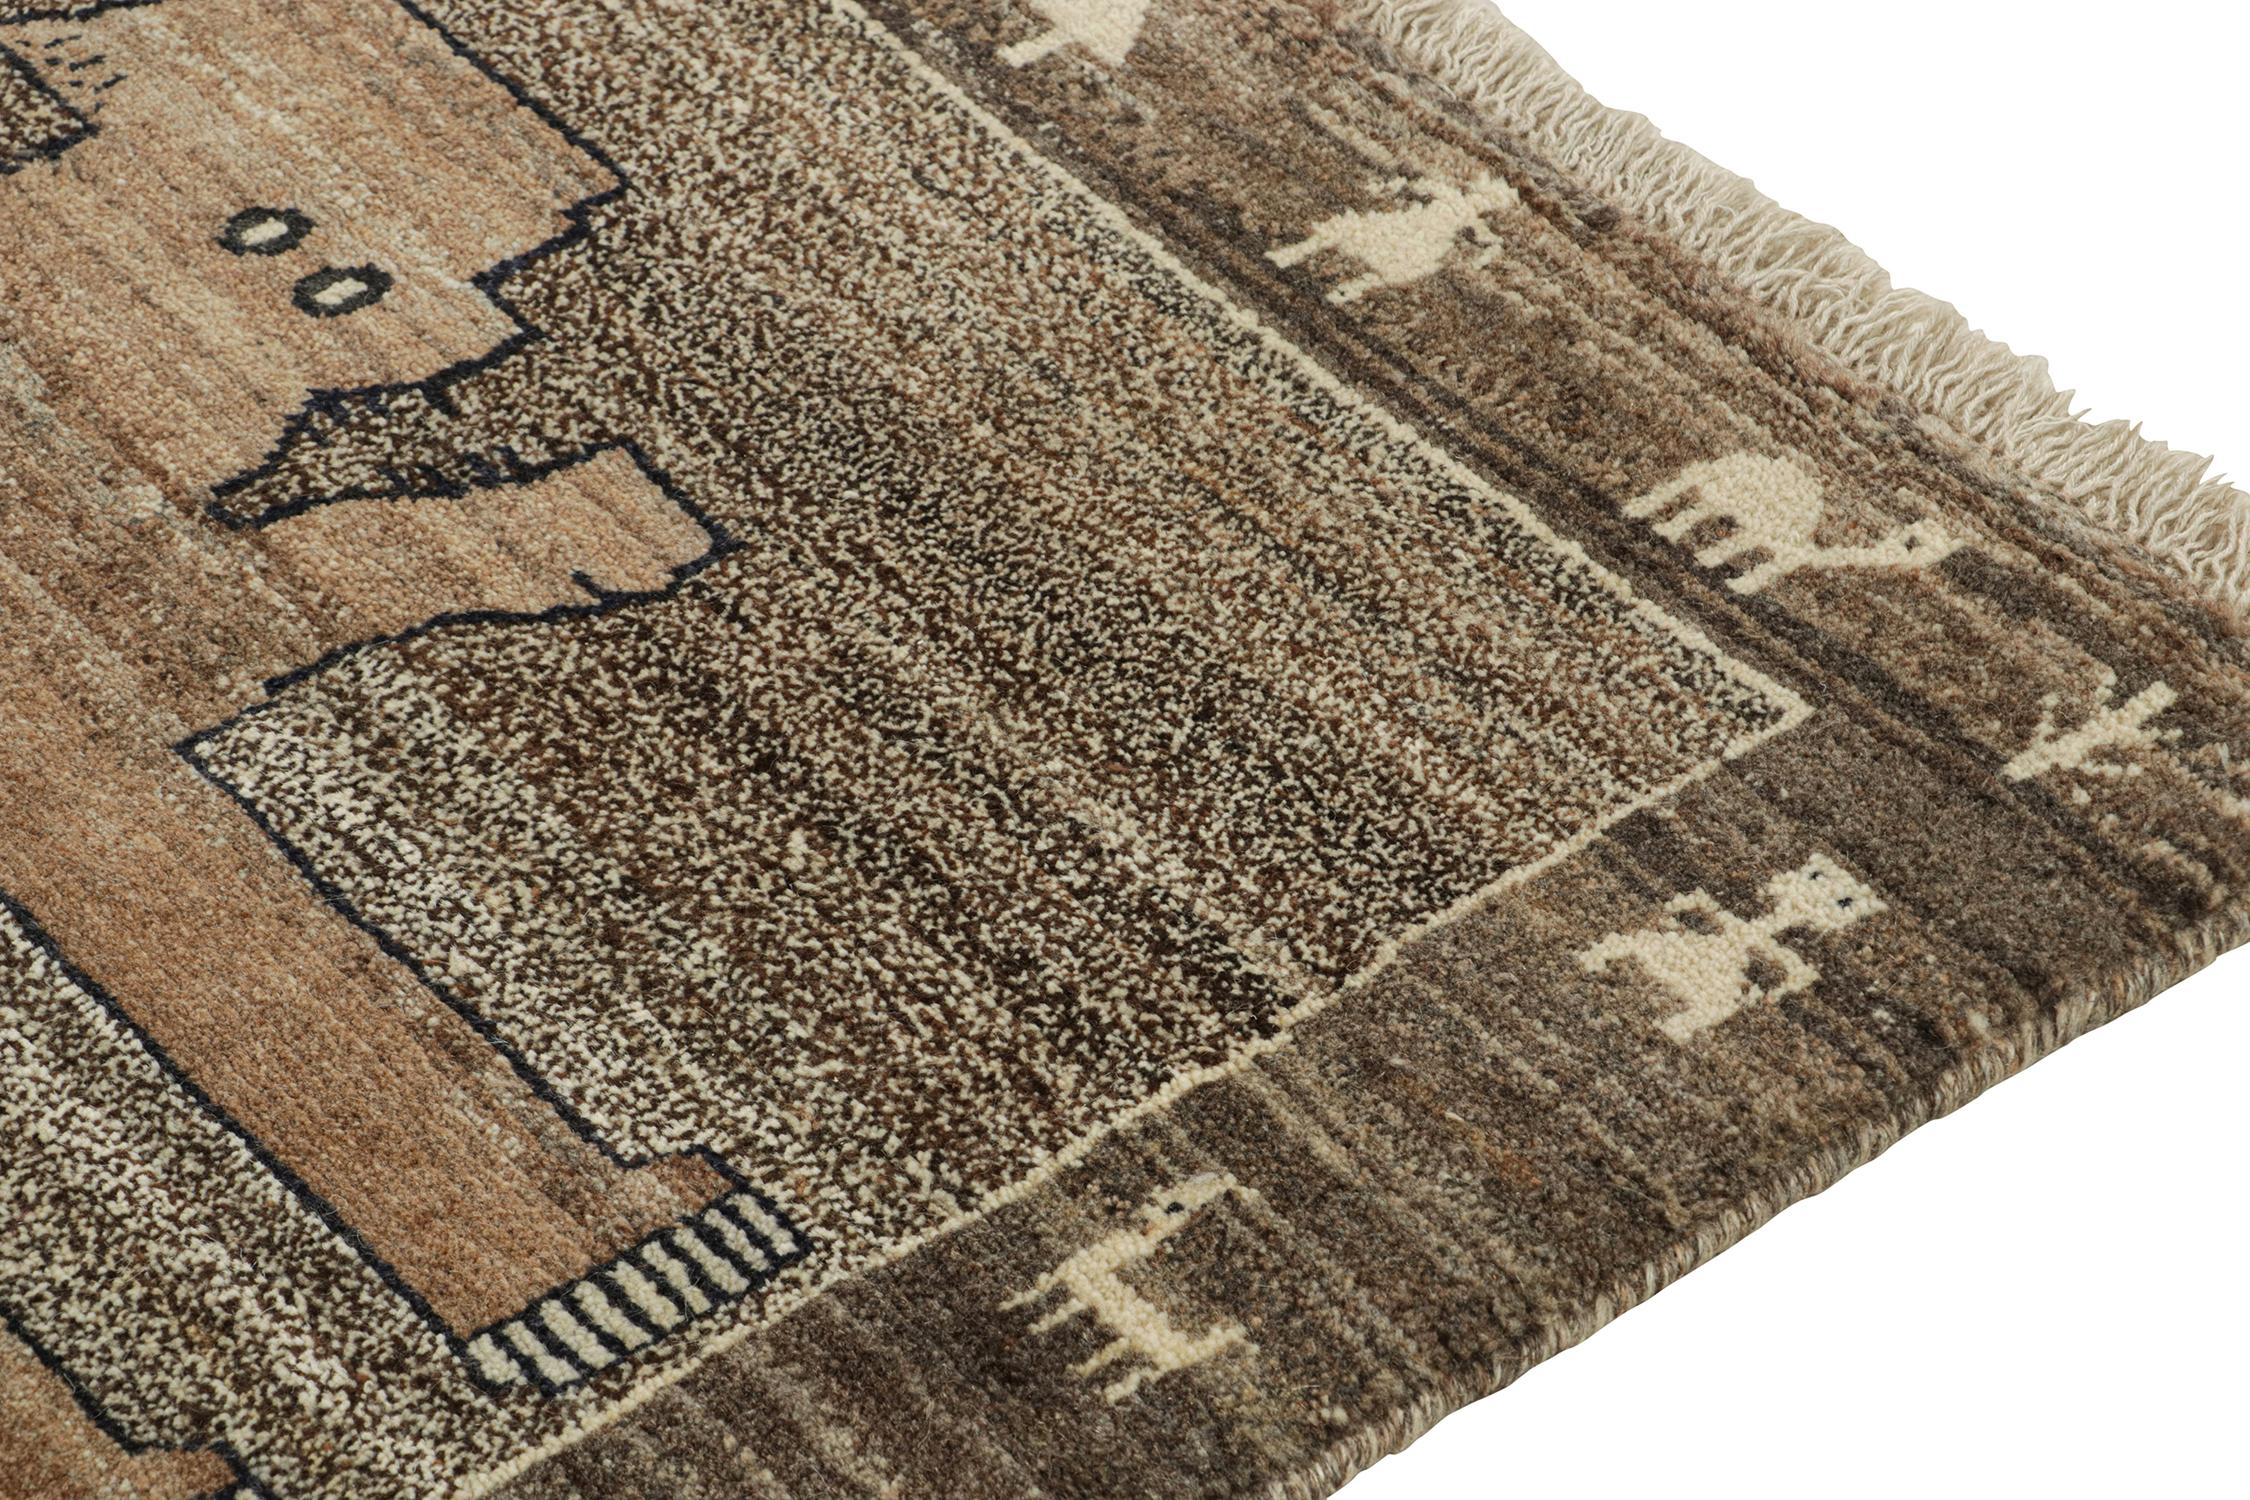 Rare Vintage Gabbeh Tribal Rug in Gray & Brown Animal Pictorial by Rug & Kilim In Good Condition For Sale In Long Island City, NY